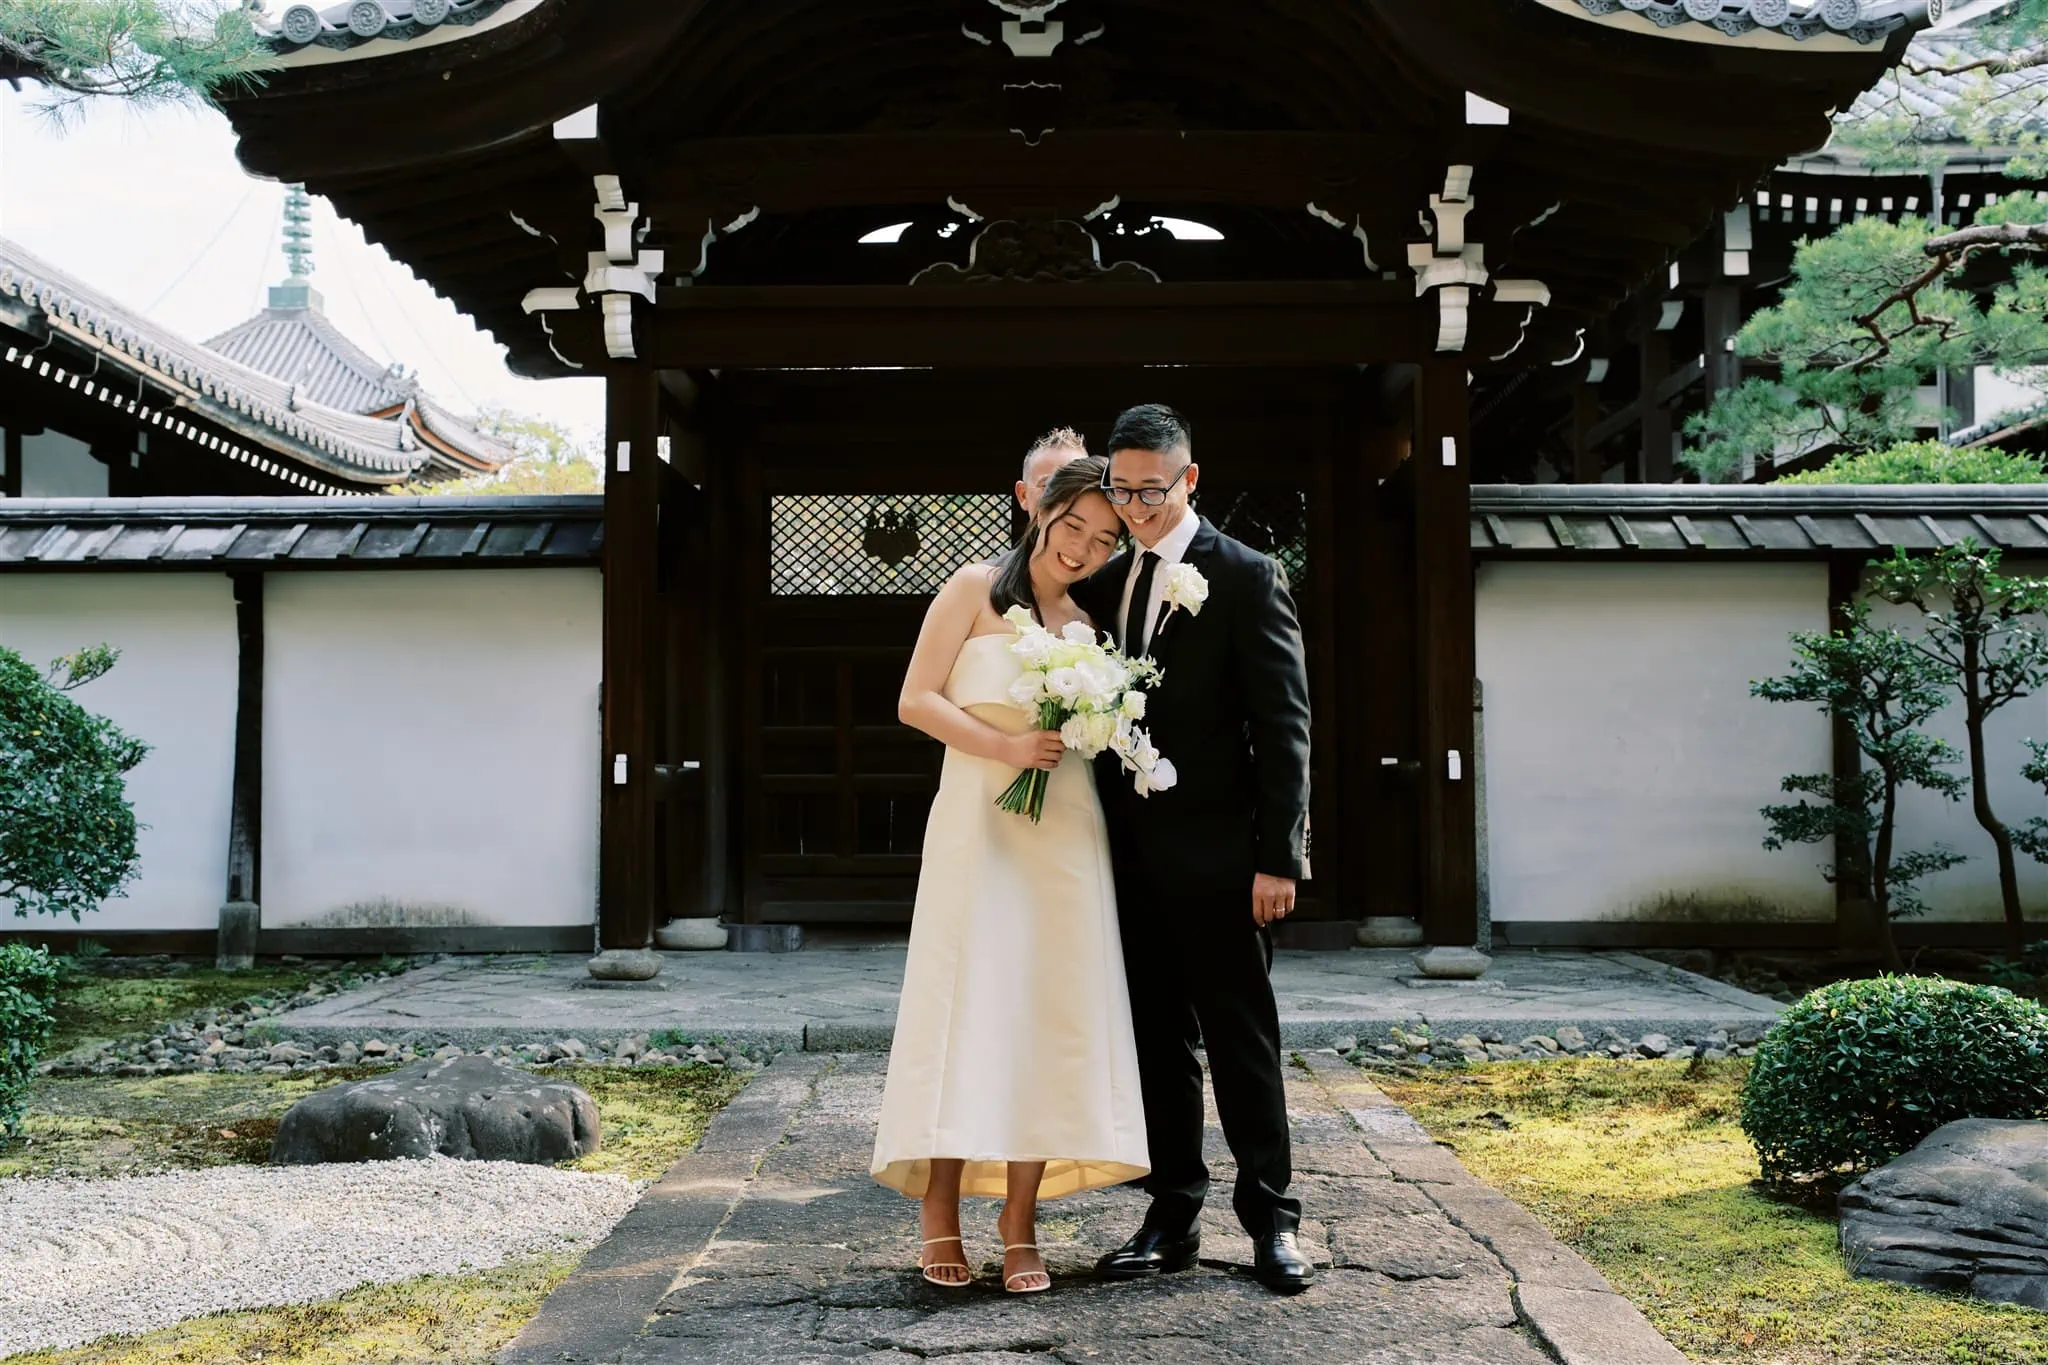 Kyoto Tokyo Japan Elopement Wedding Photographer, Planner & Videographer | A Japan elopement with a couple standing in front of a Japanese temple.